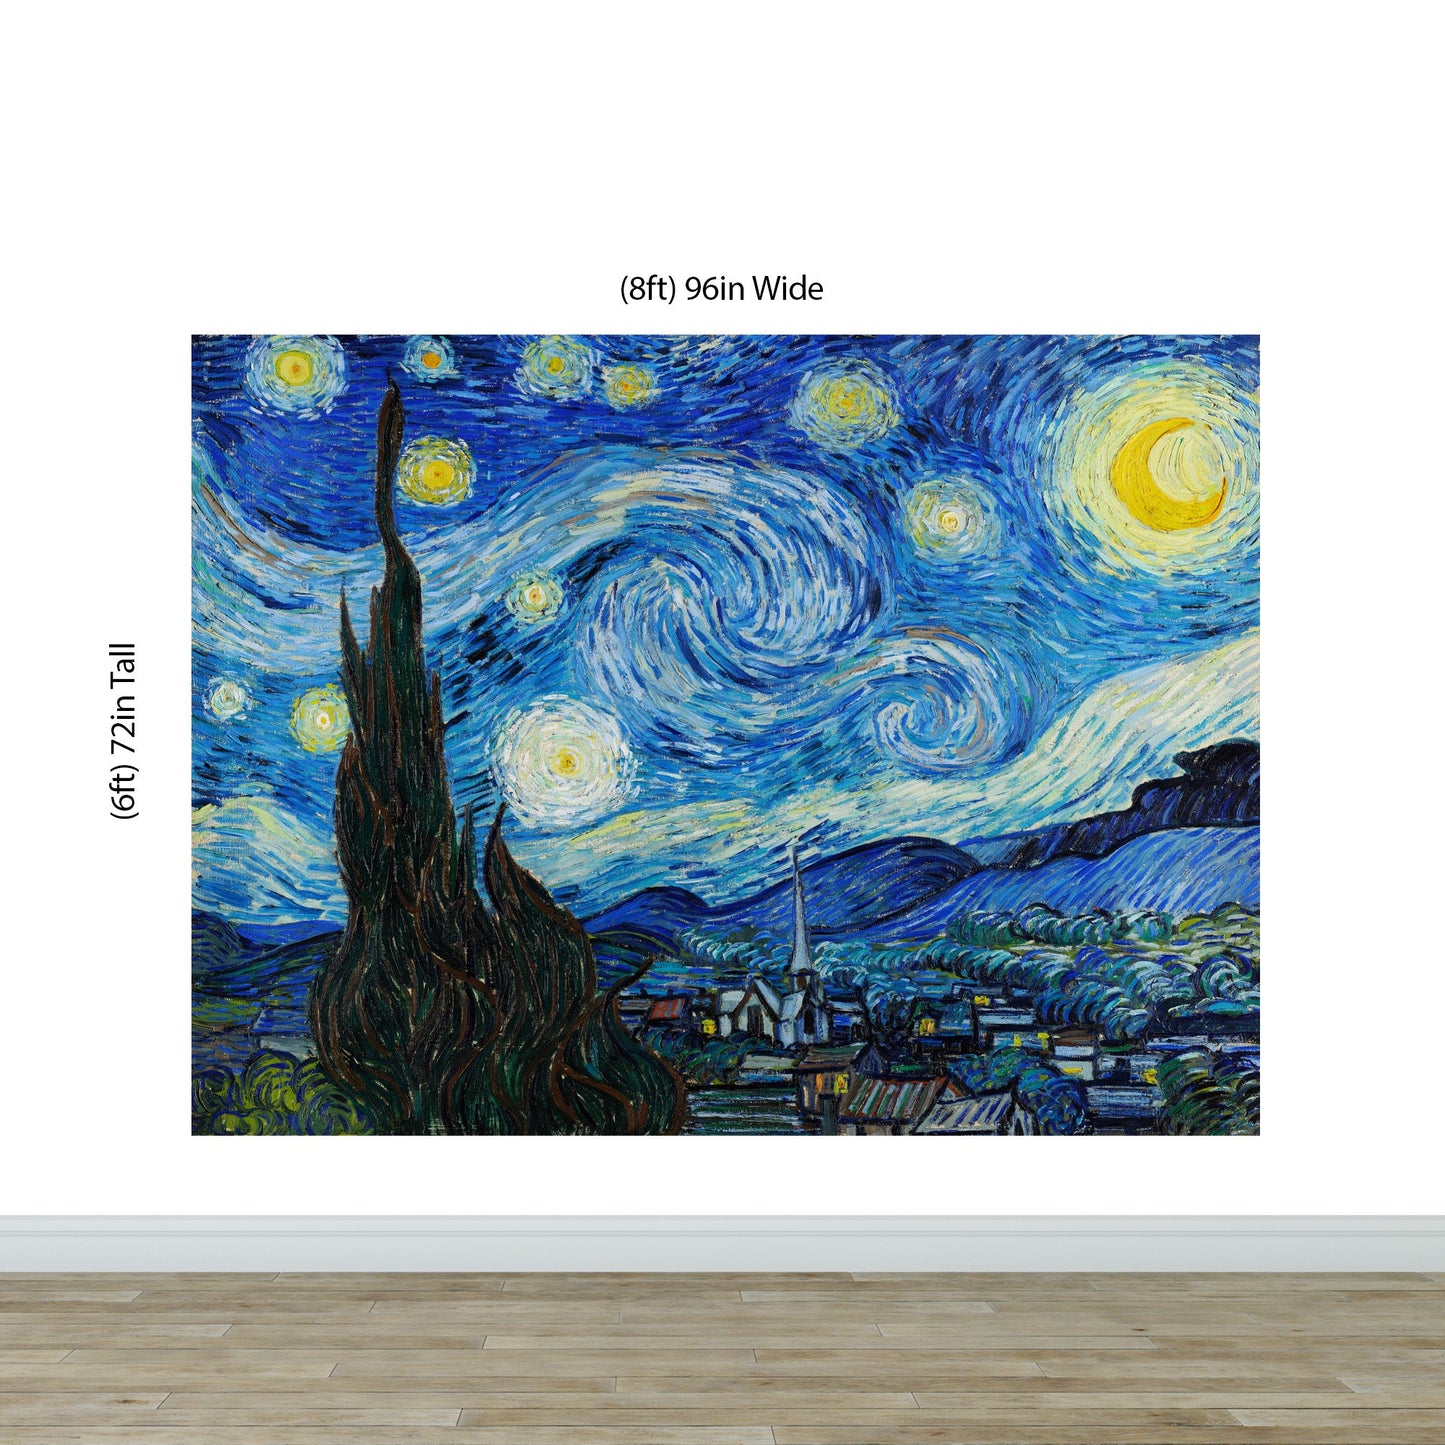 Vincent Van Gogh's The Starry Night Painting Wallpaper Mural.  #6742